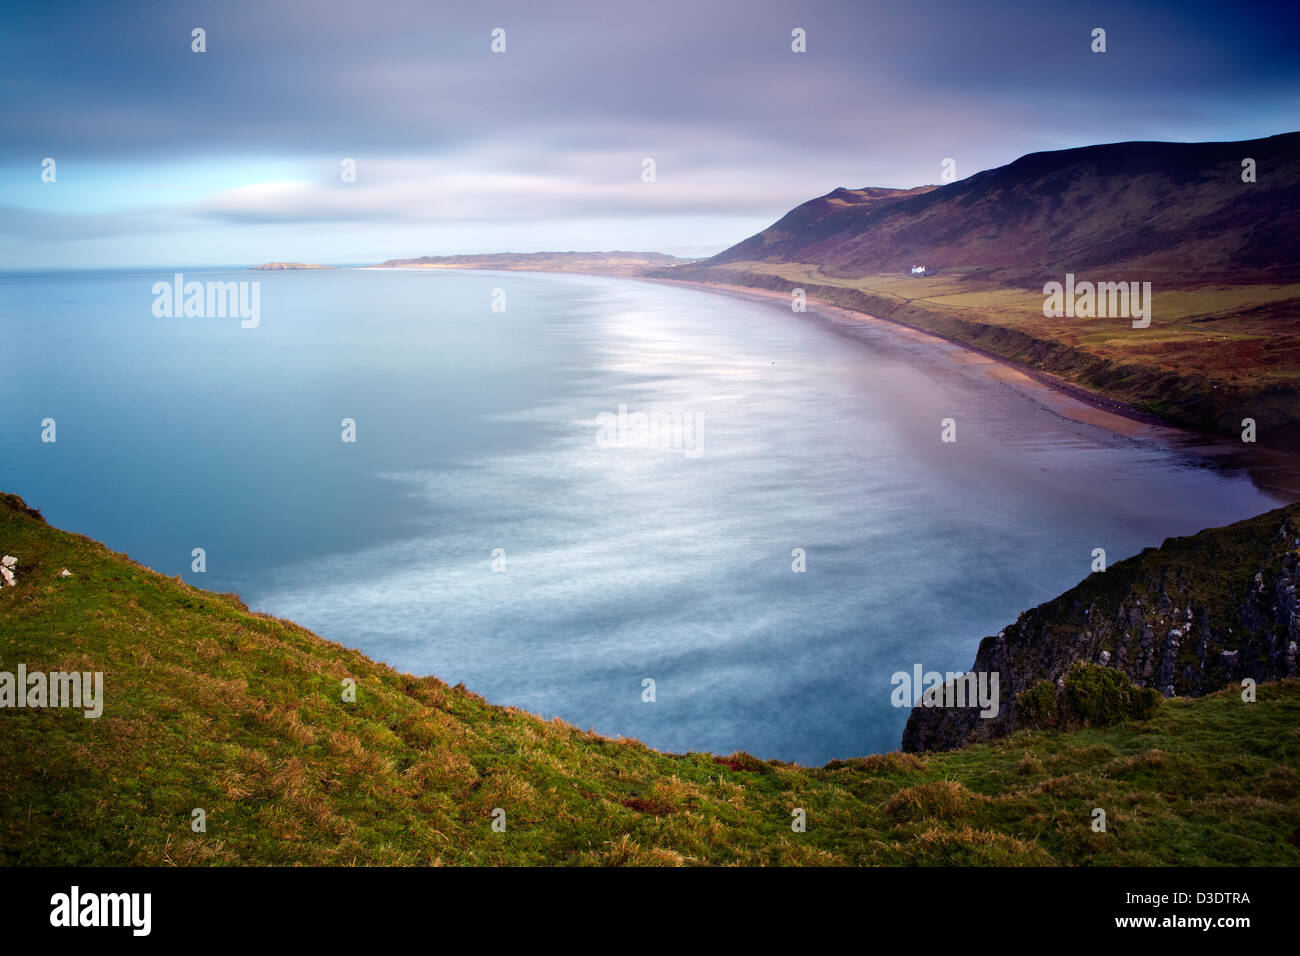 Rhossili Bay, Gower Peninsula, South West Wales. Stock Photo